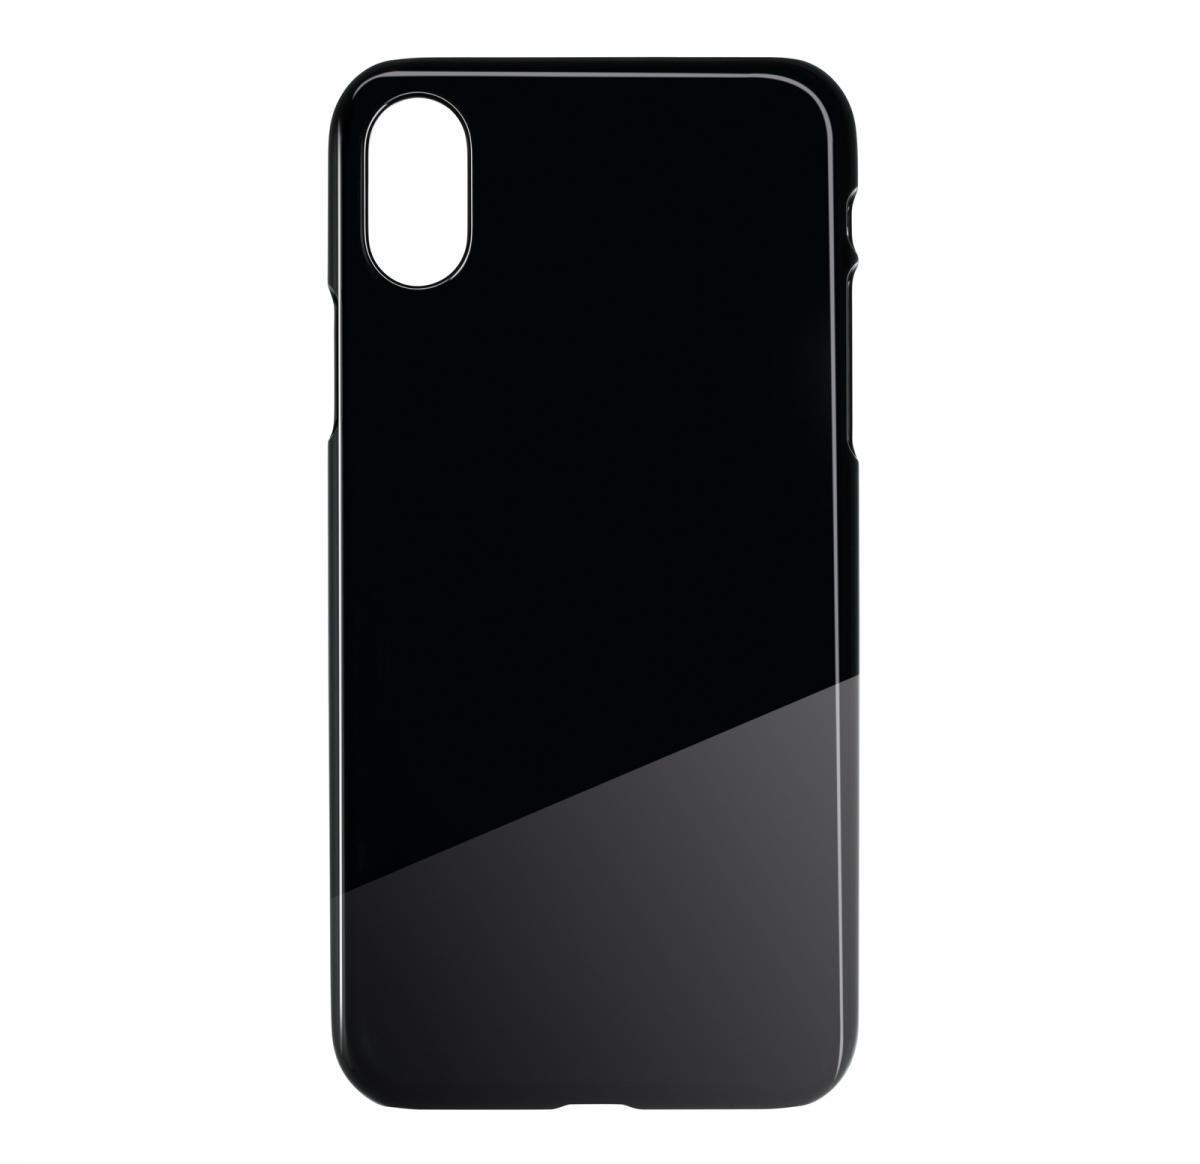 Smartphonecover -COVER iPhone XS Max BLACK